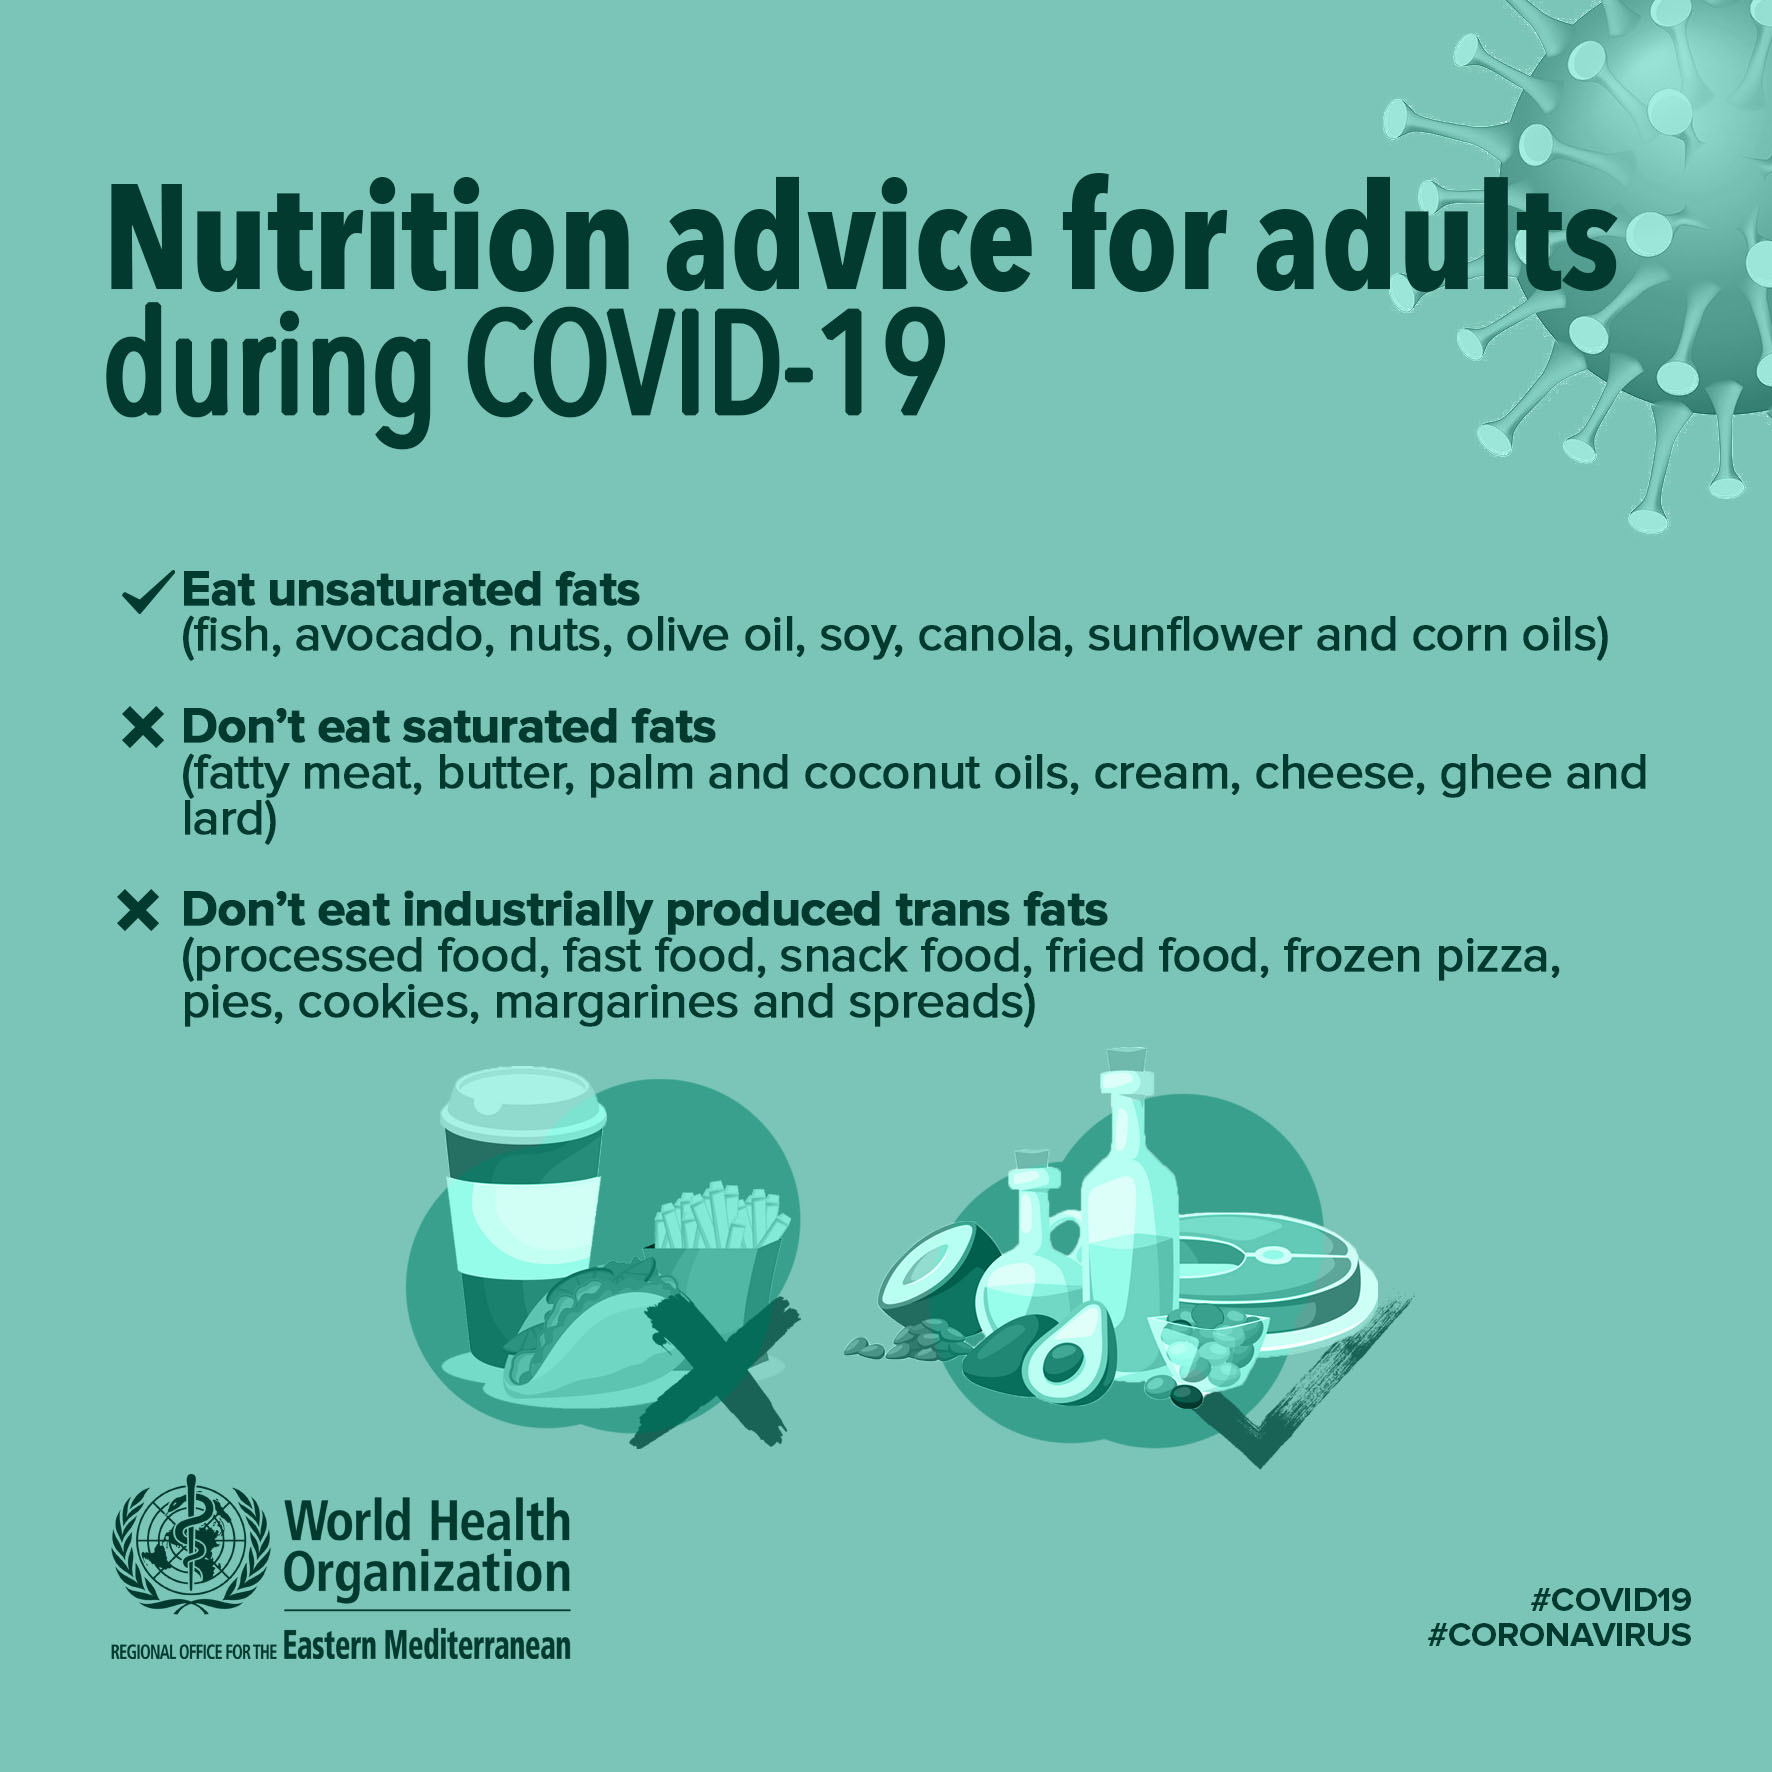 WHO EMRO on Twitter: "Nutrition advice for adults during #COVID19: ✔️ Eat unsaturated fats 🐟🥜🥑 ❌ Don't eat saturated fats 🥩🧈🧀 ❌ Don't eat industrially produced trans fats 🍔🍟🍪… https://t.co/U28APnalY3"